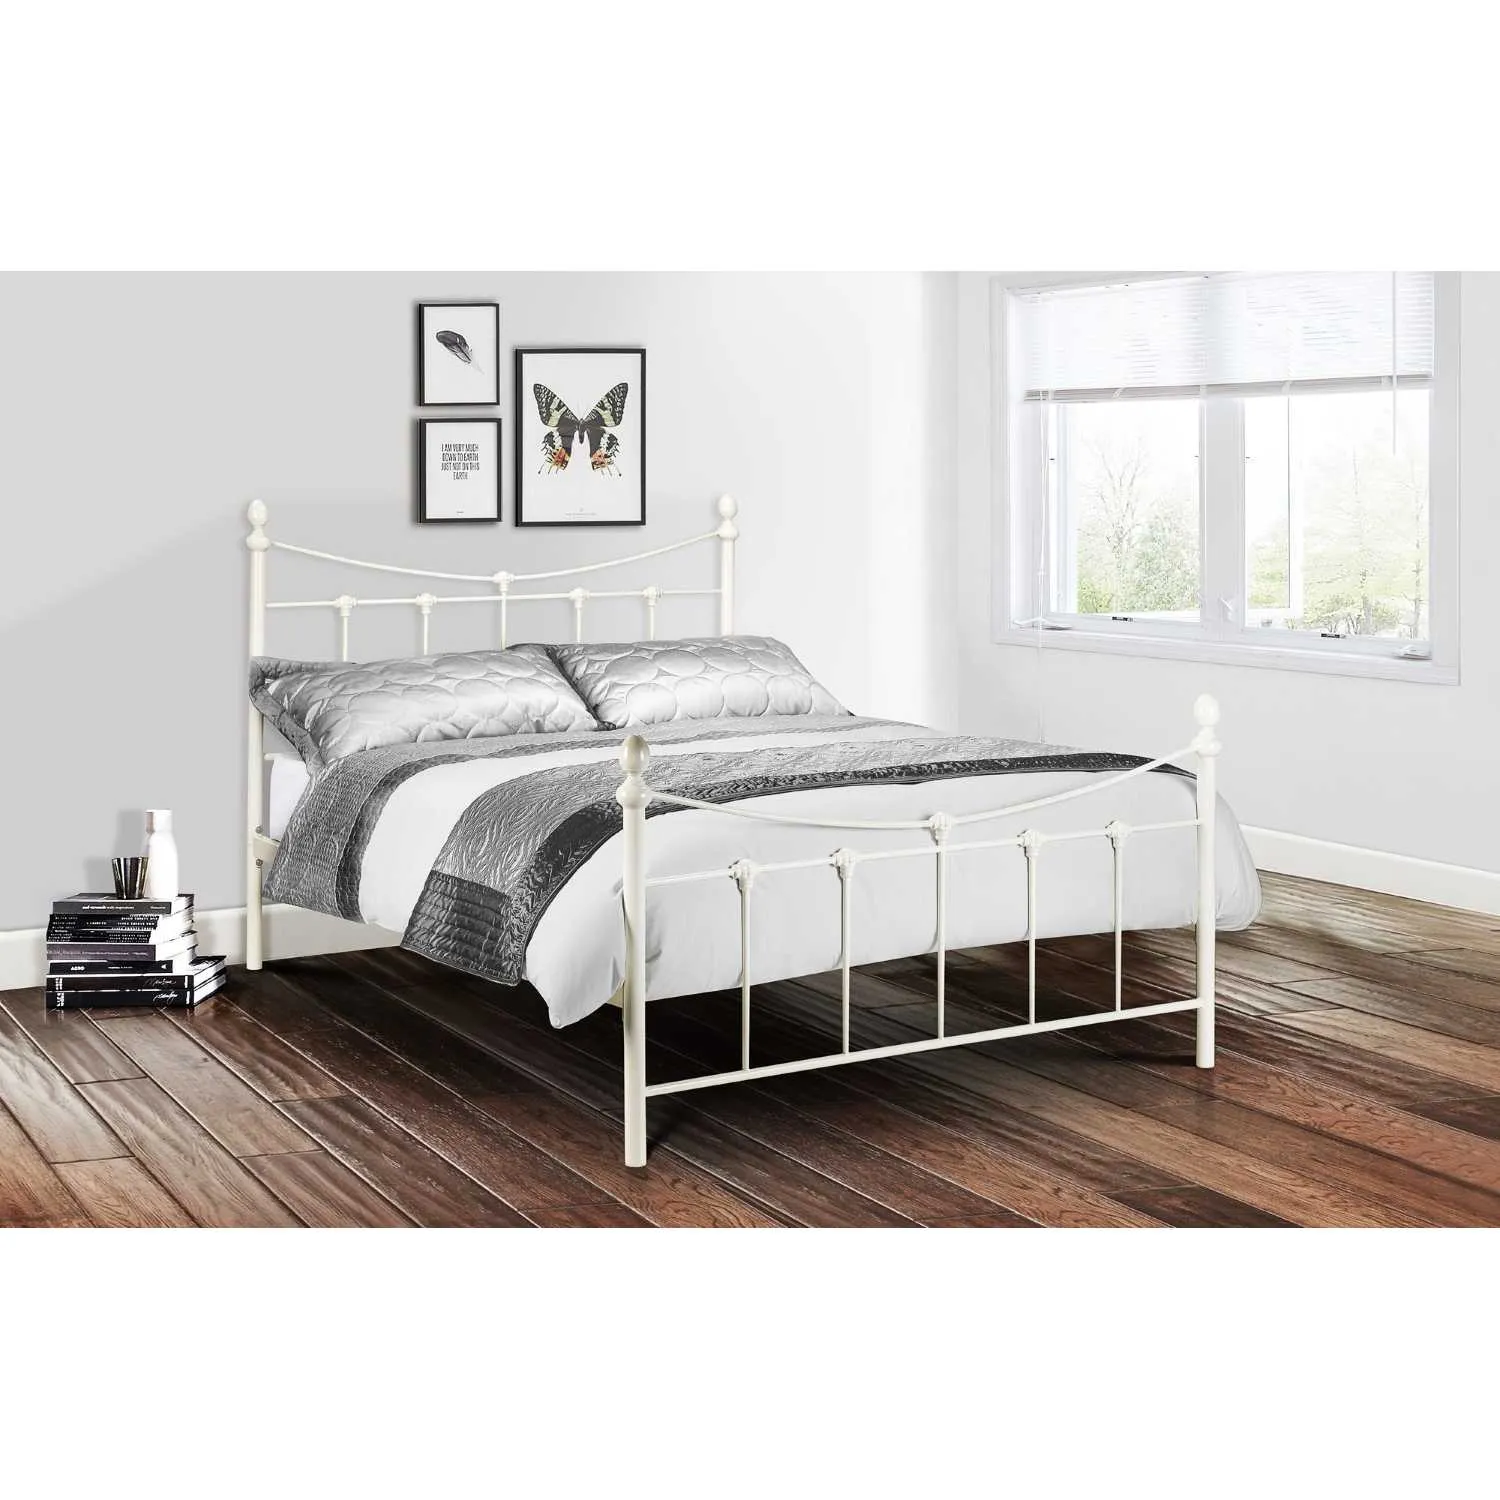 Stone White Painted Traditional Metal Steel 135cm Double 4ft6in Bedstead